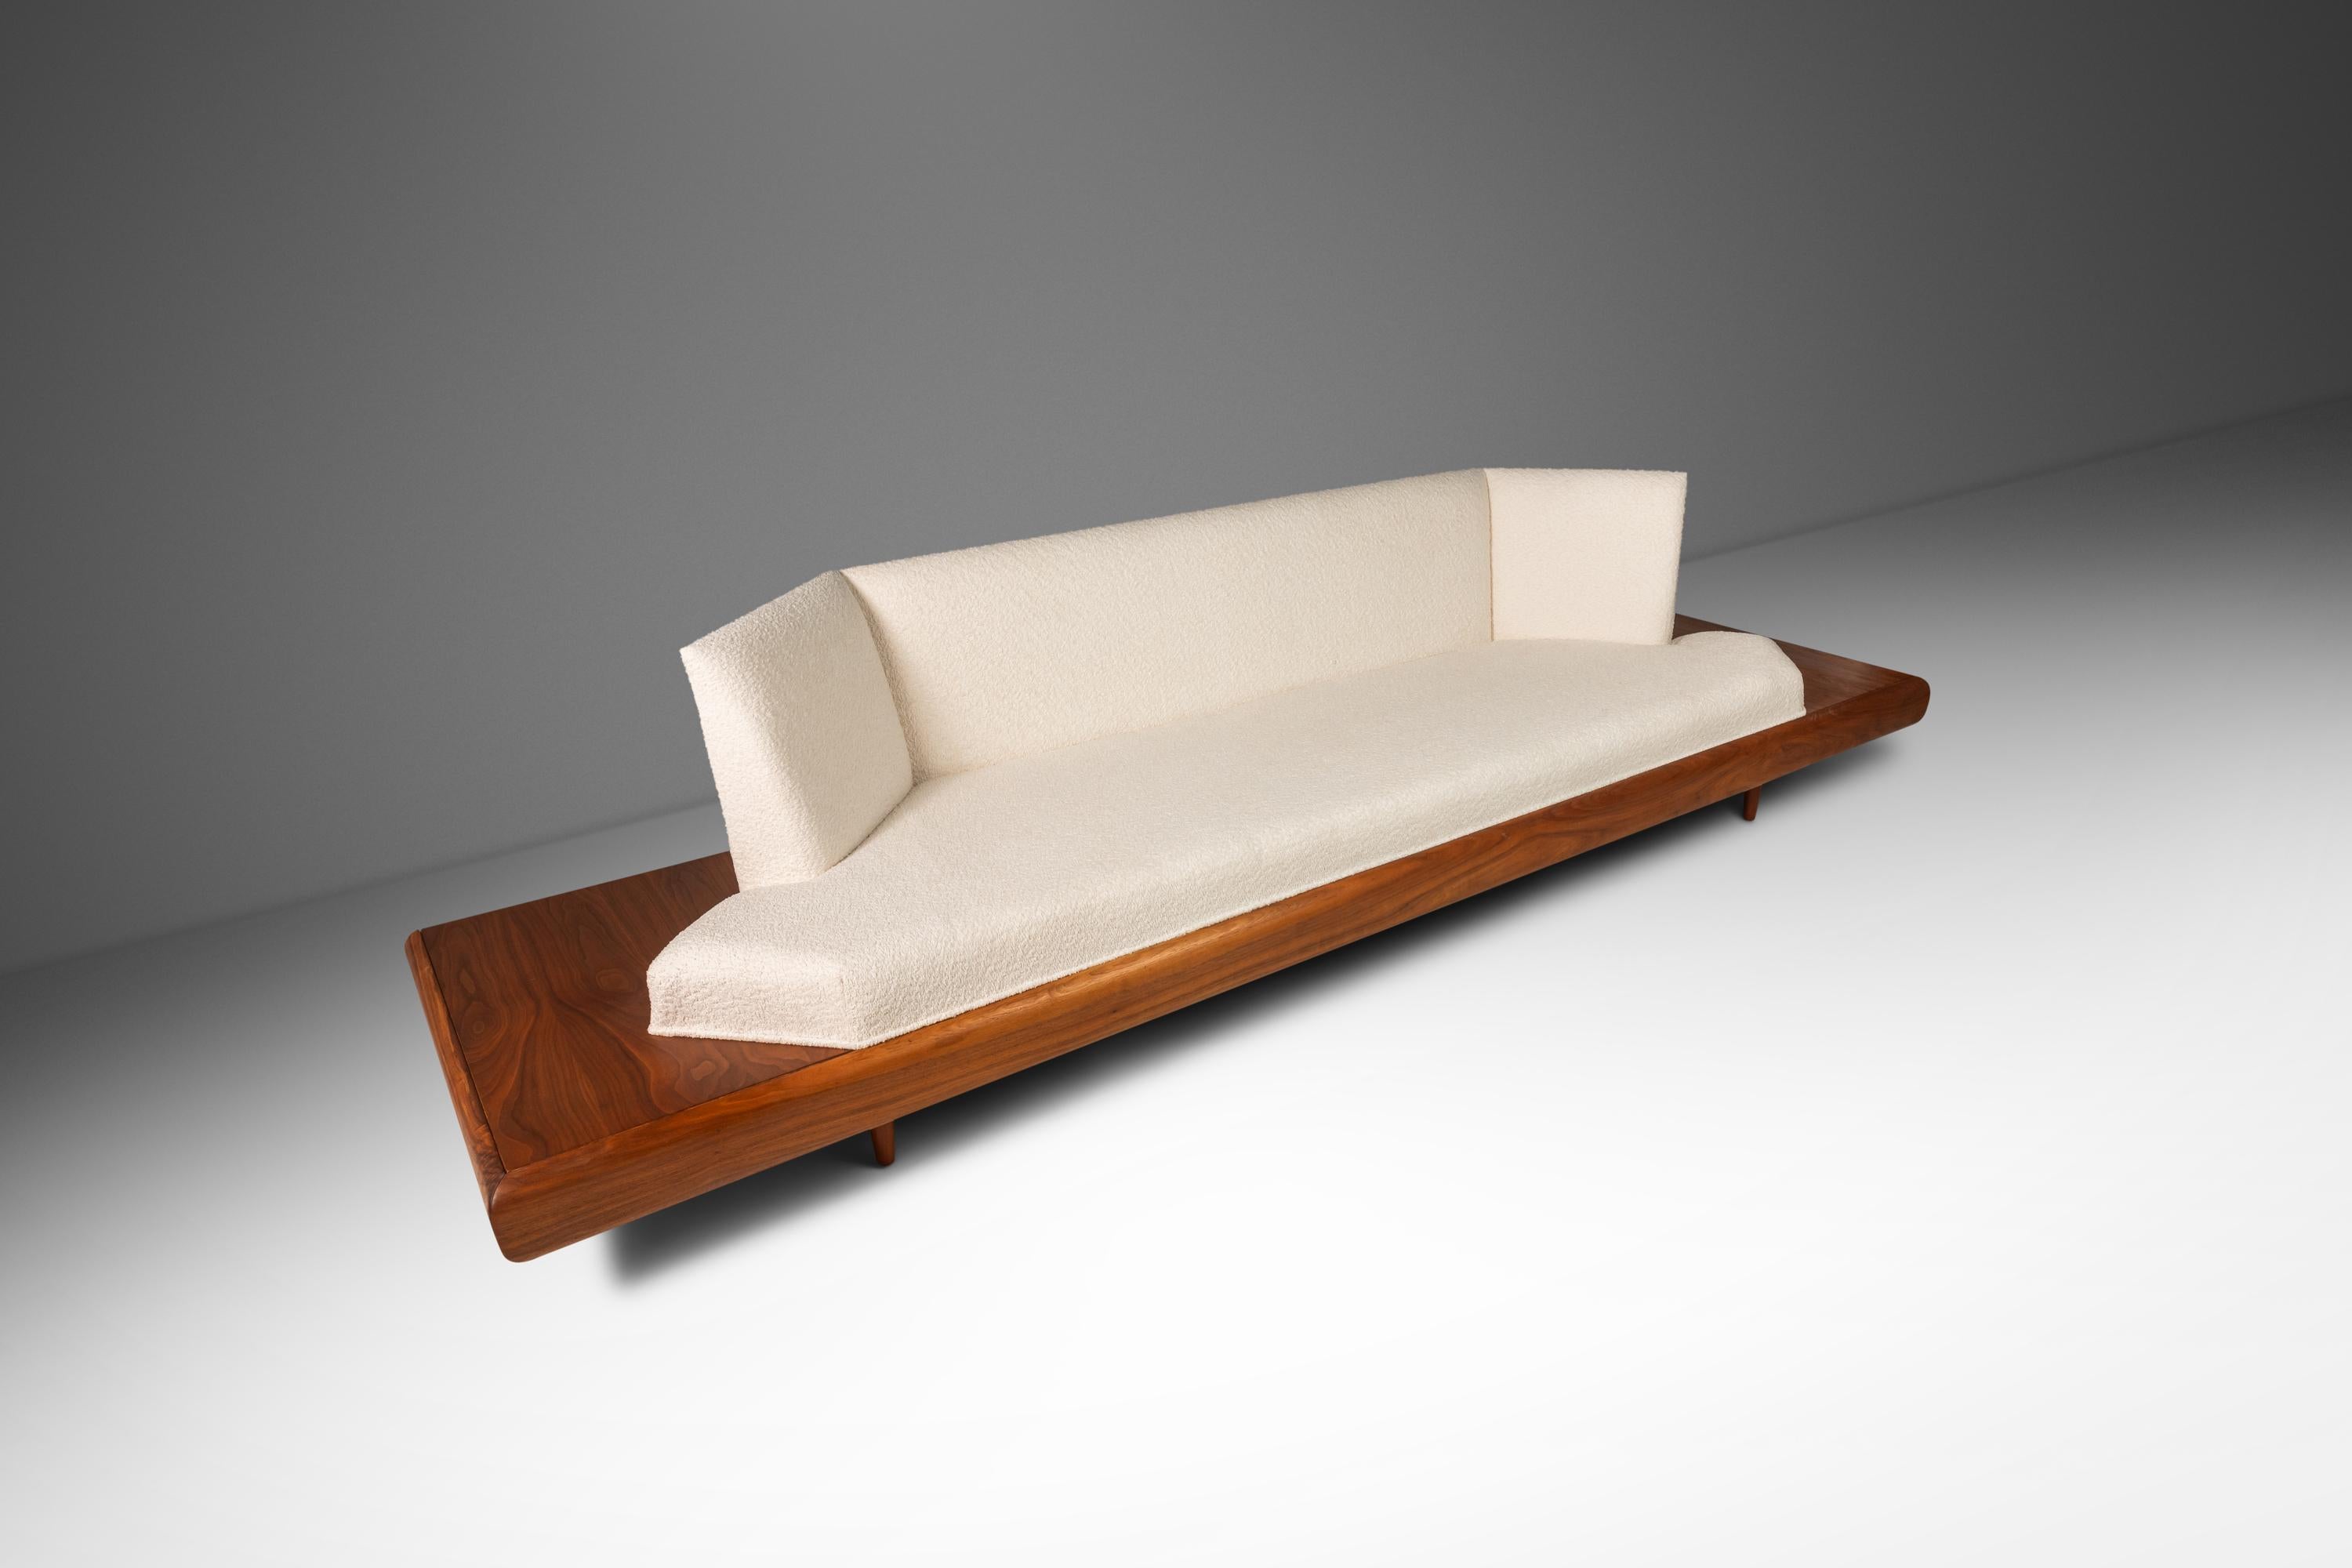 Designed by the incomparable Adrian Pearsall, this iconic Model 2006-S Platform Sofa is the epitome of functional art. Audacious in it's scope, shape and materials used this sofa is a true American masterpiece. Featuring new cotton bouclé by Knoll